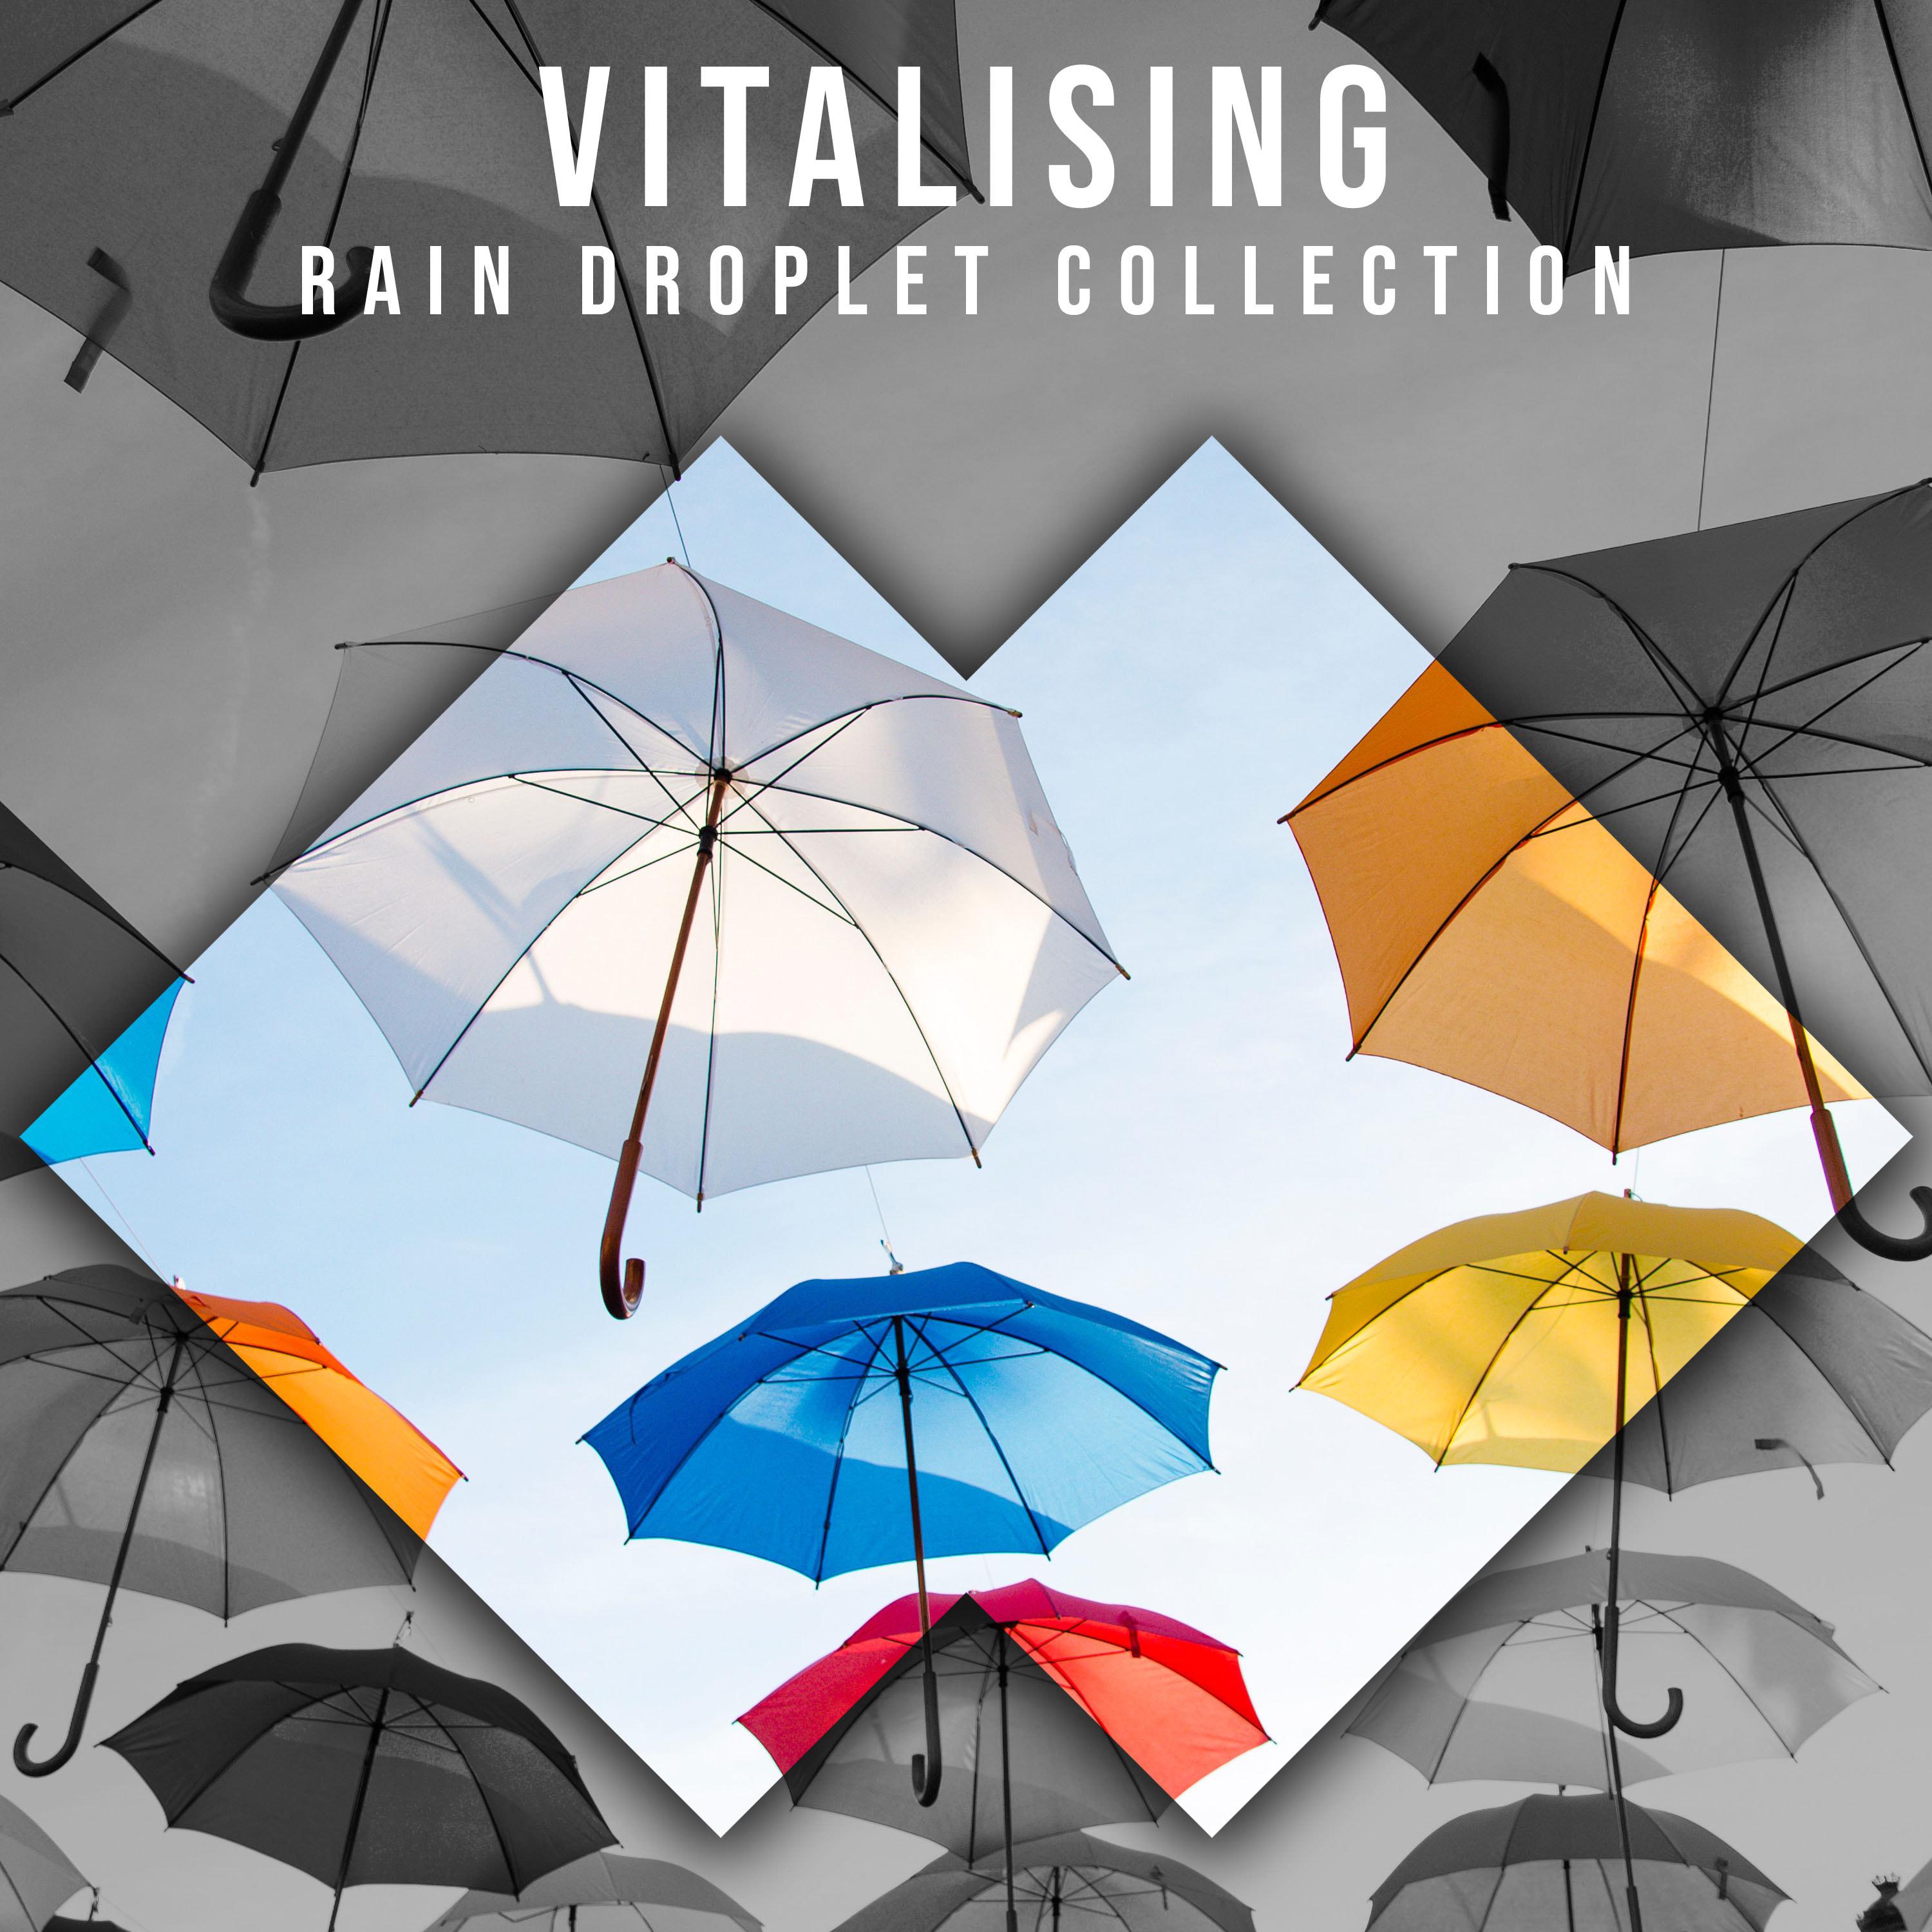 #15 Vitalising Rain Droplet Collection from Mother Nature